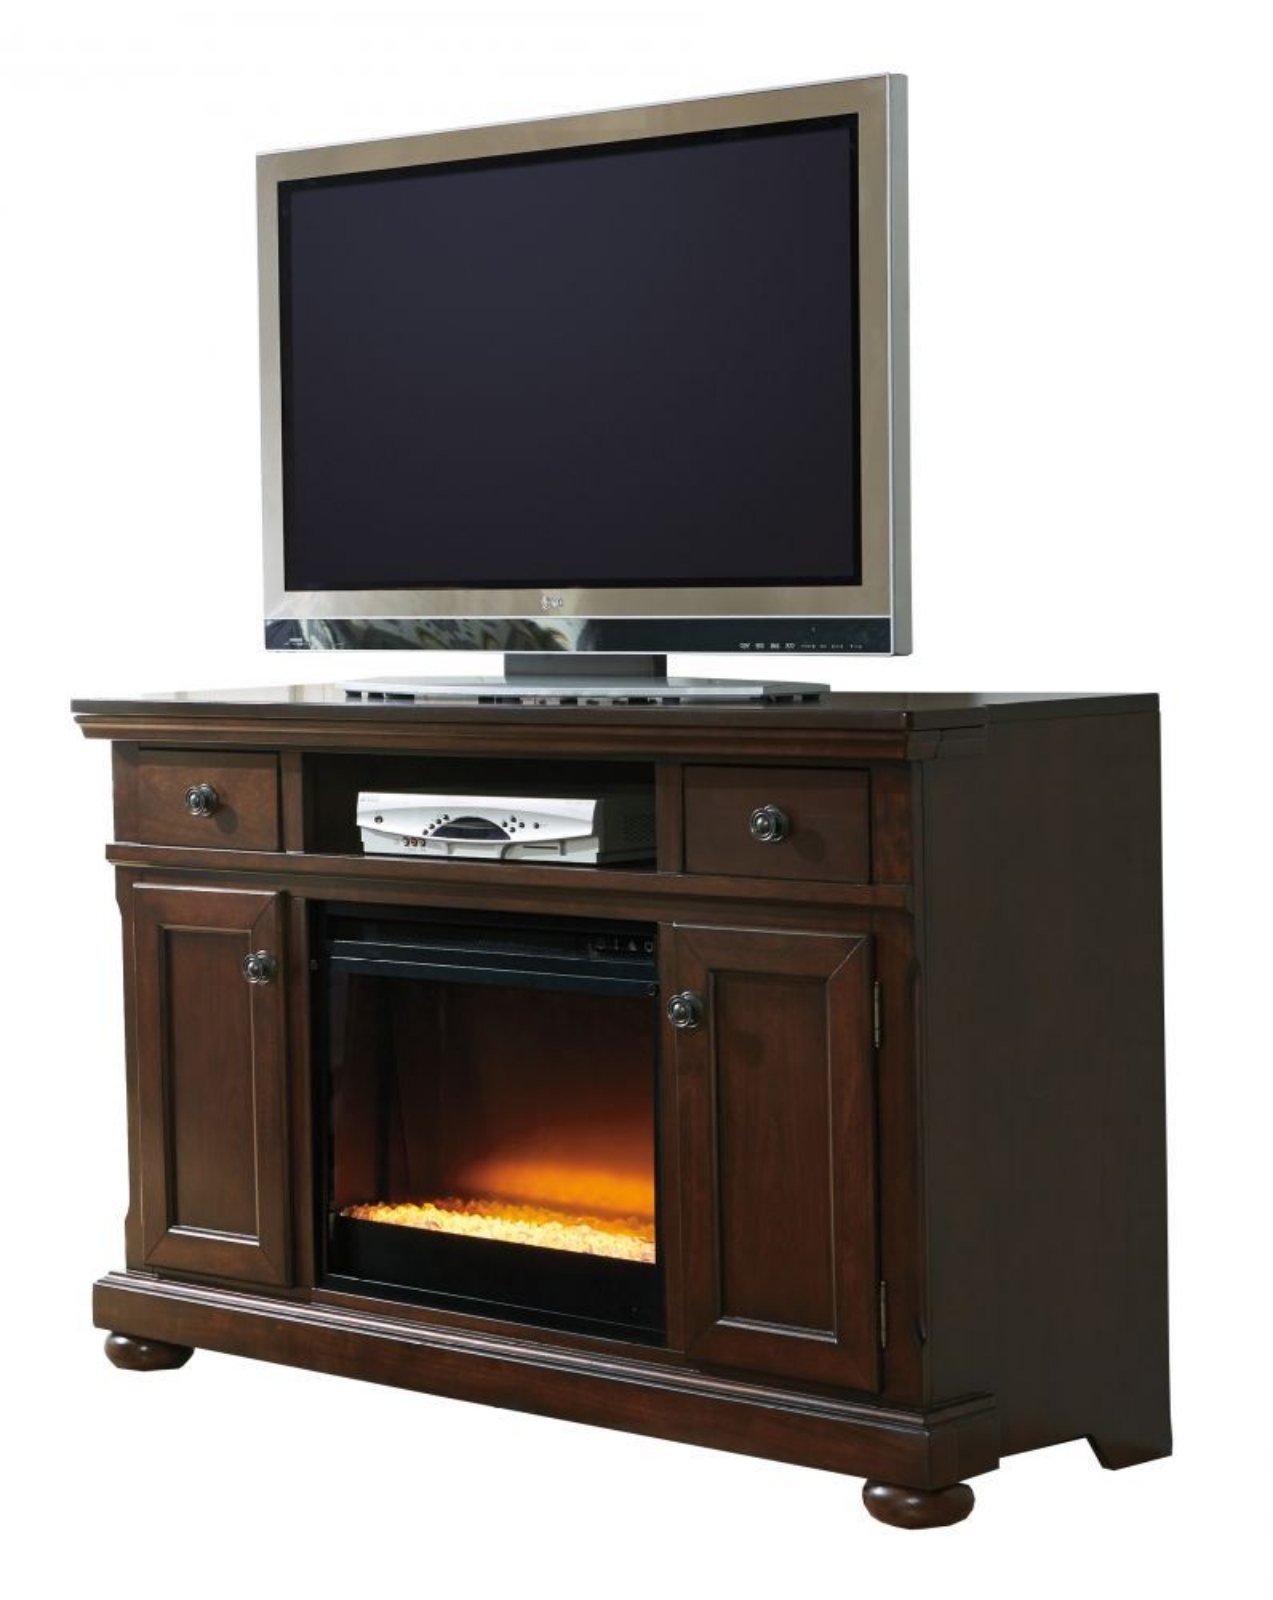 Picture of Porter TV Stand with Fireplace